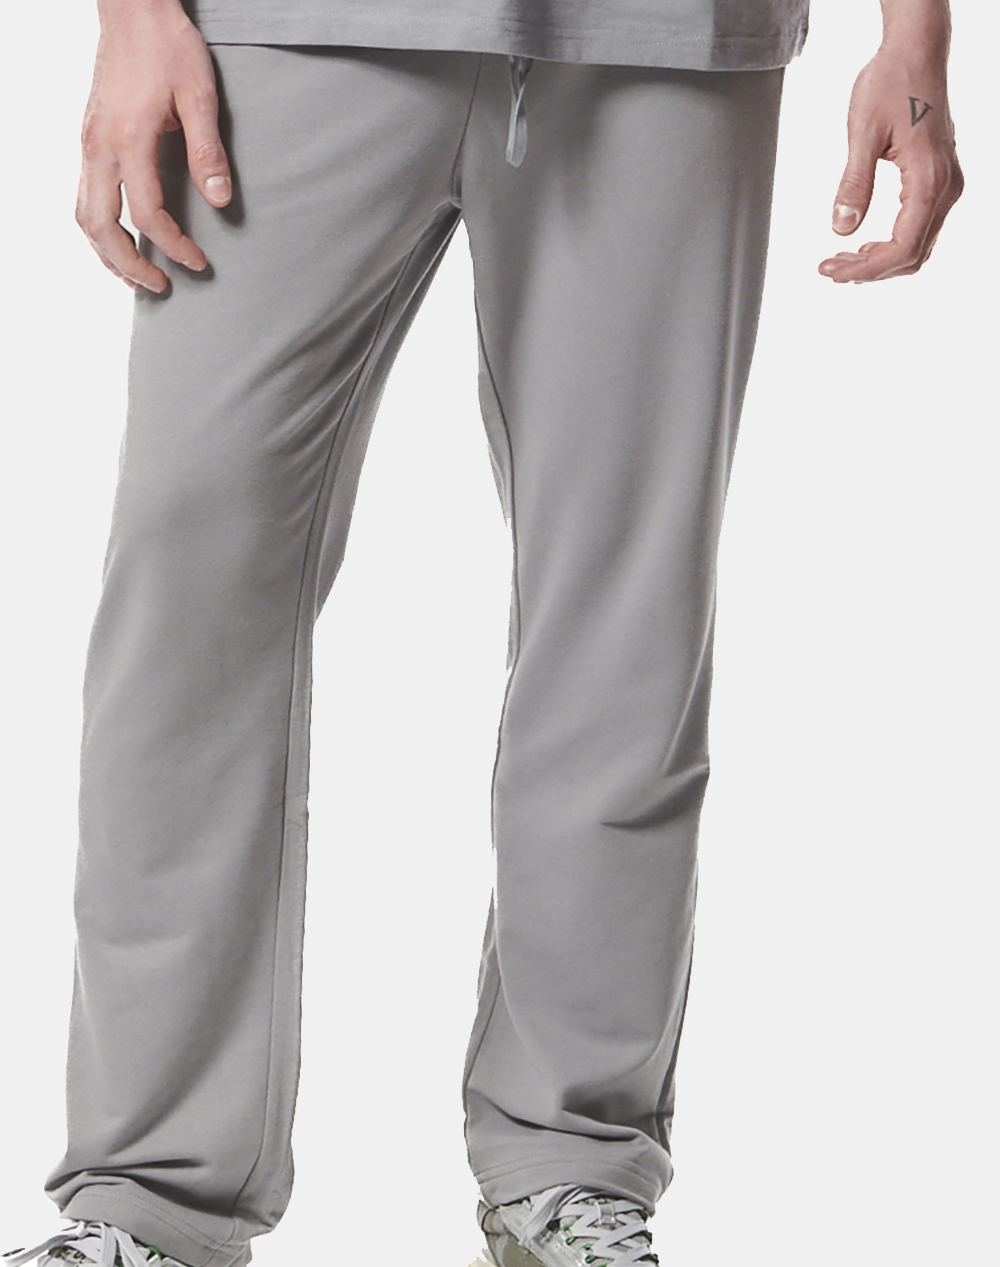 BODY ACTION MEN”S ESSENTIAL STRAIGHT SWEATPANTS W/ZIPPERS 023430-01-SILVER GREY LightGray 3820PBODY2040076_XR00135